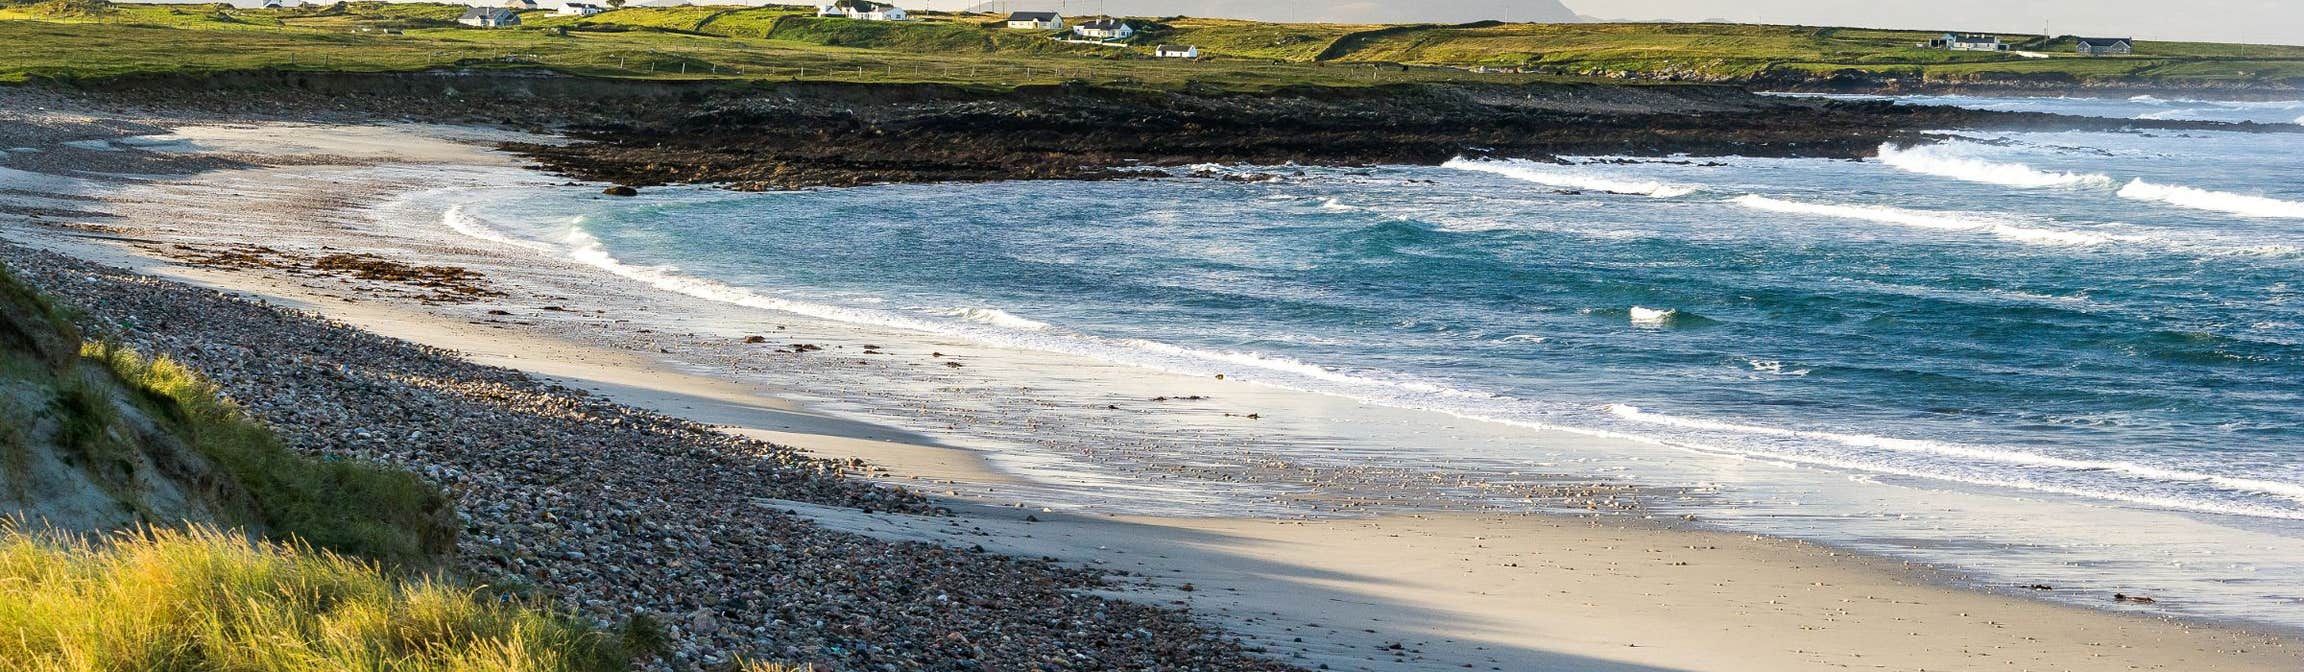 Image of a beach in Belmullet in County Mayo